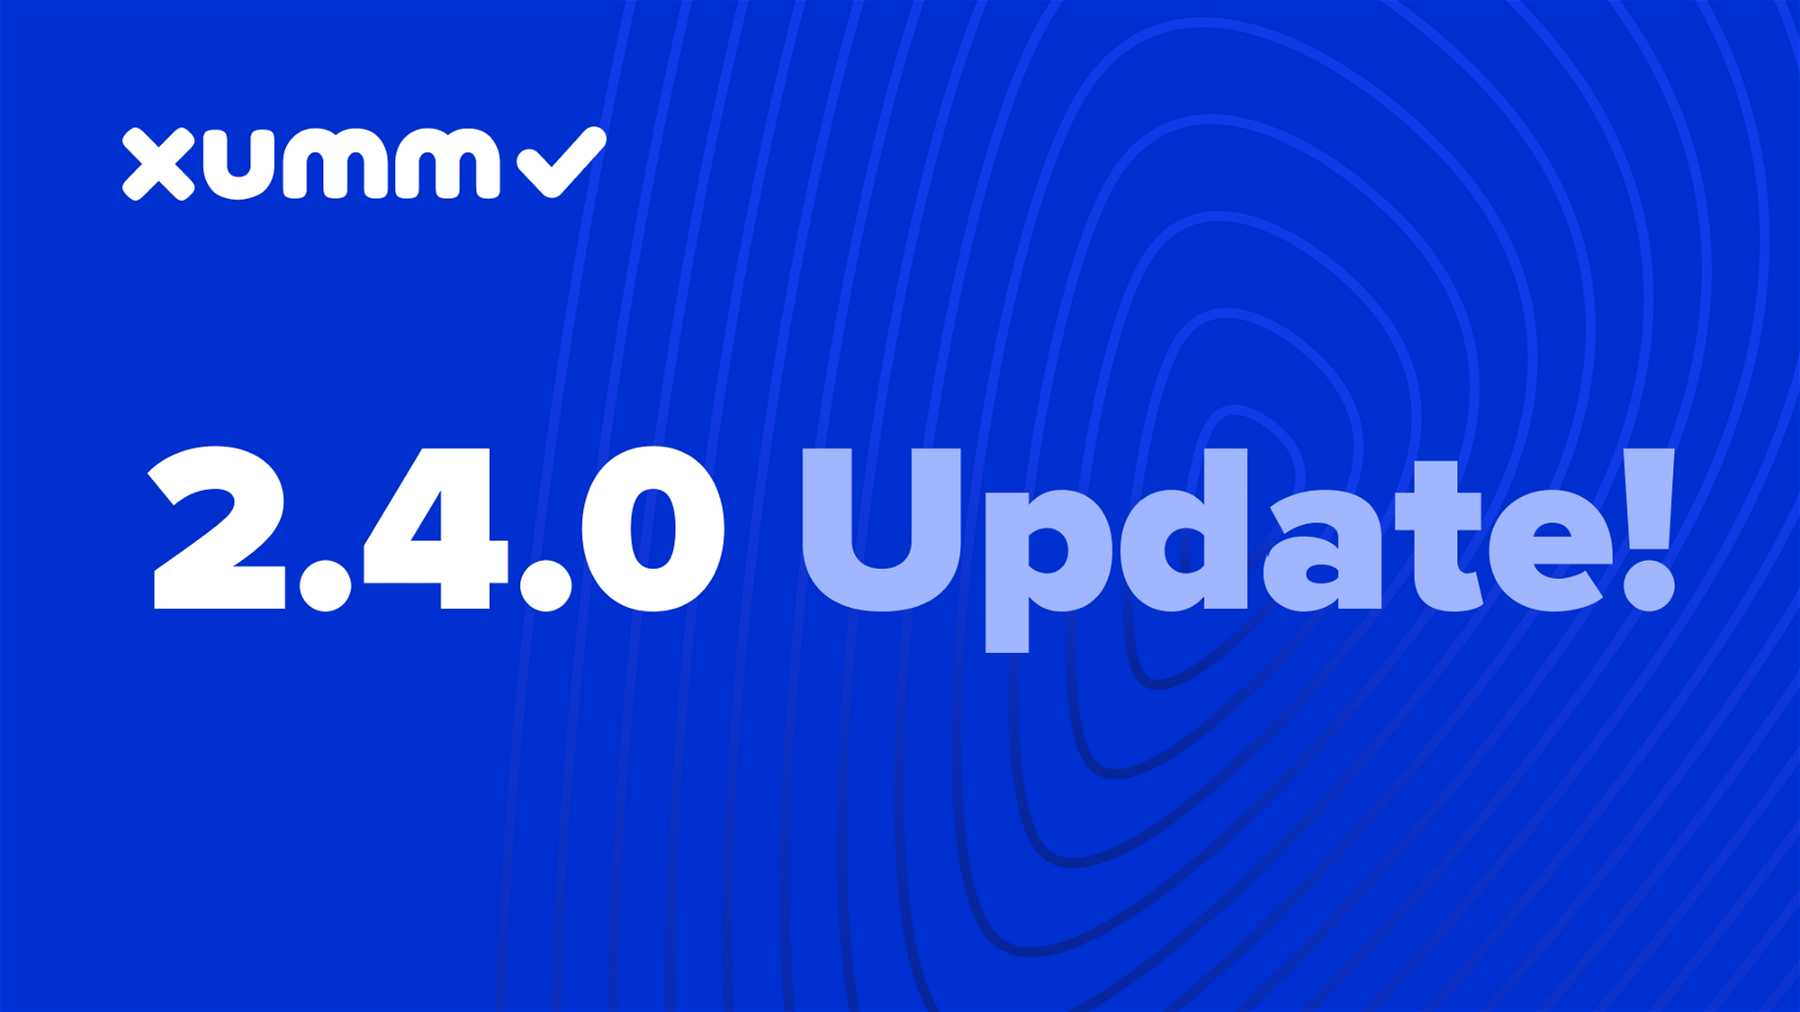 Xumm 2.4.0: Taking it to the Next Level for Retail, NFTs and Security